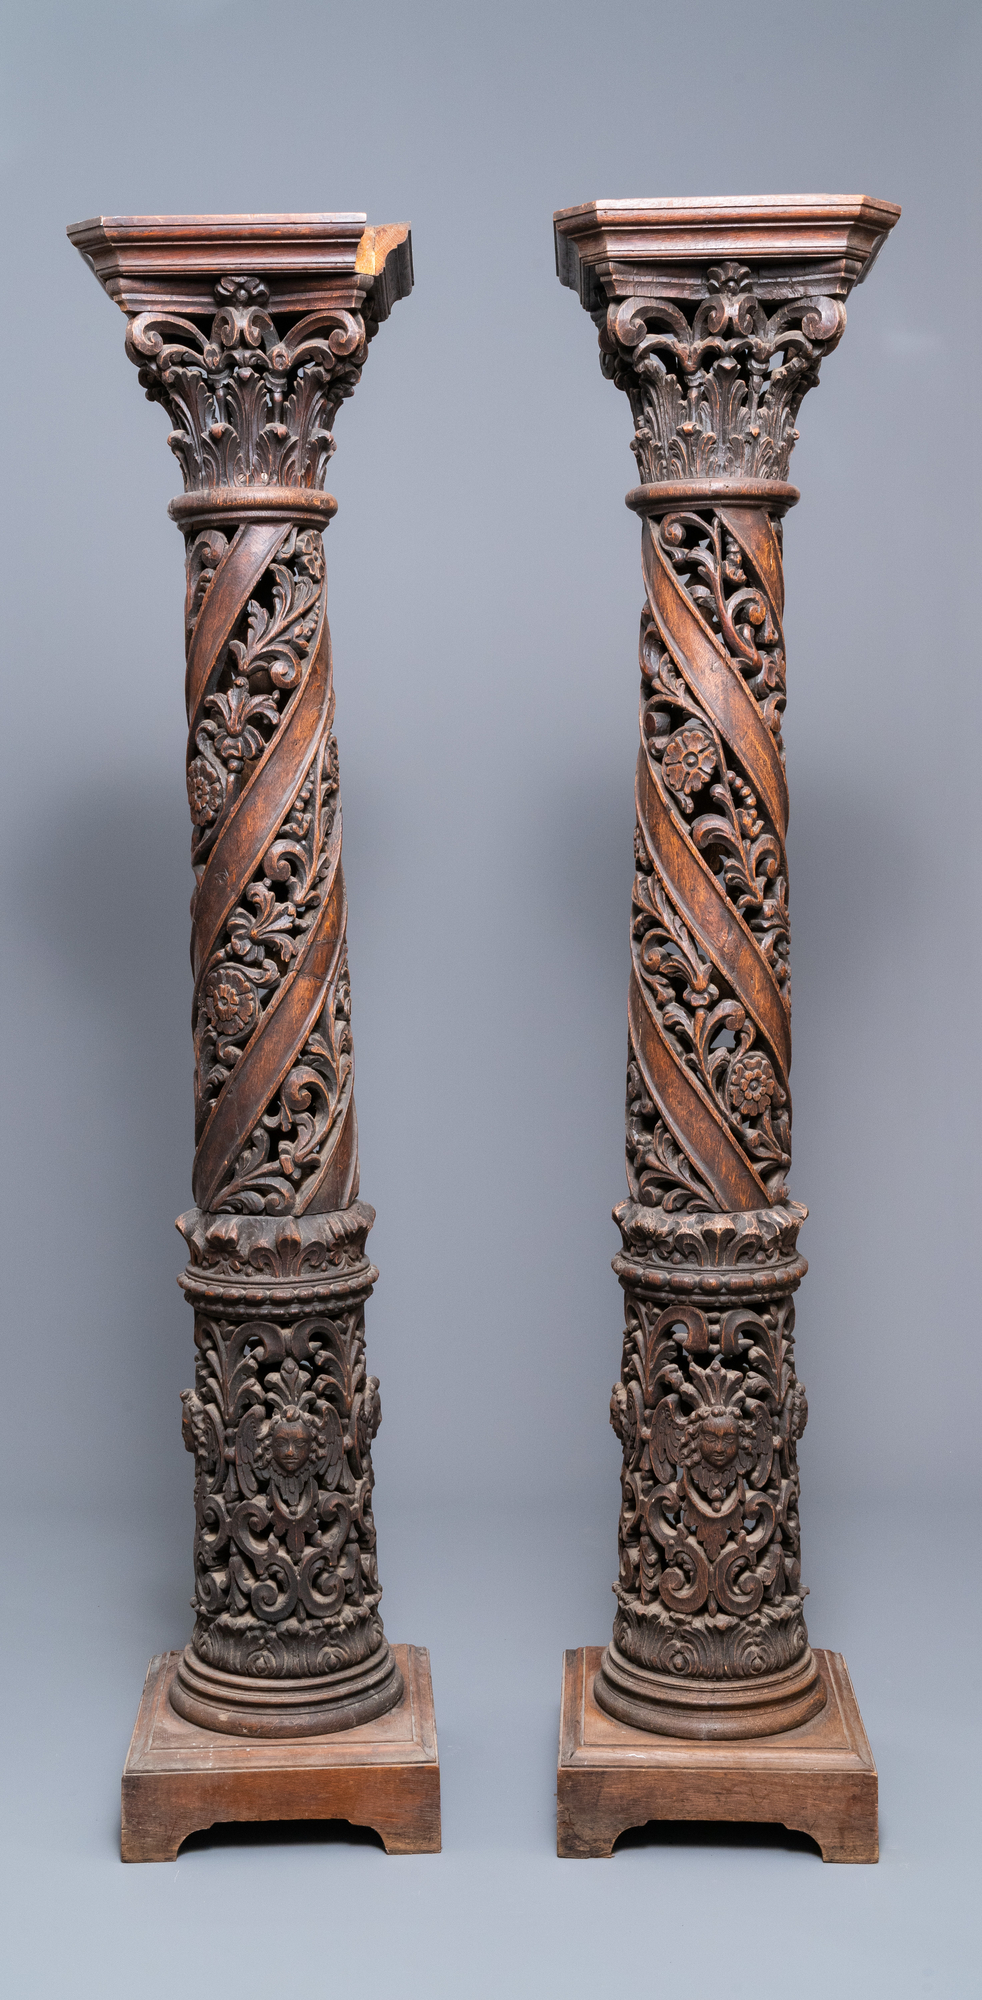 A pair of reticulated carved oak Corinthian columns with cherub heads and vines, 17th C. - Image 4 of 7